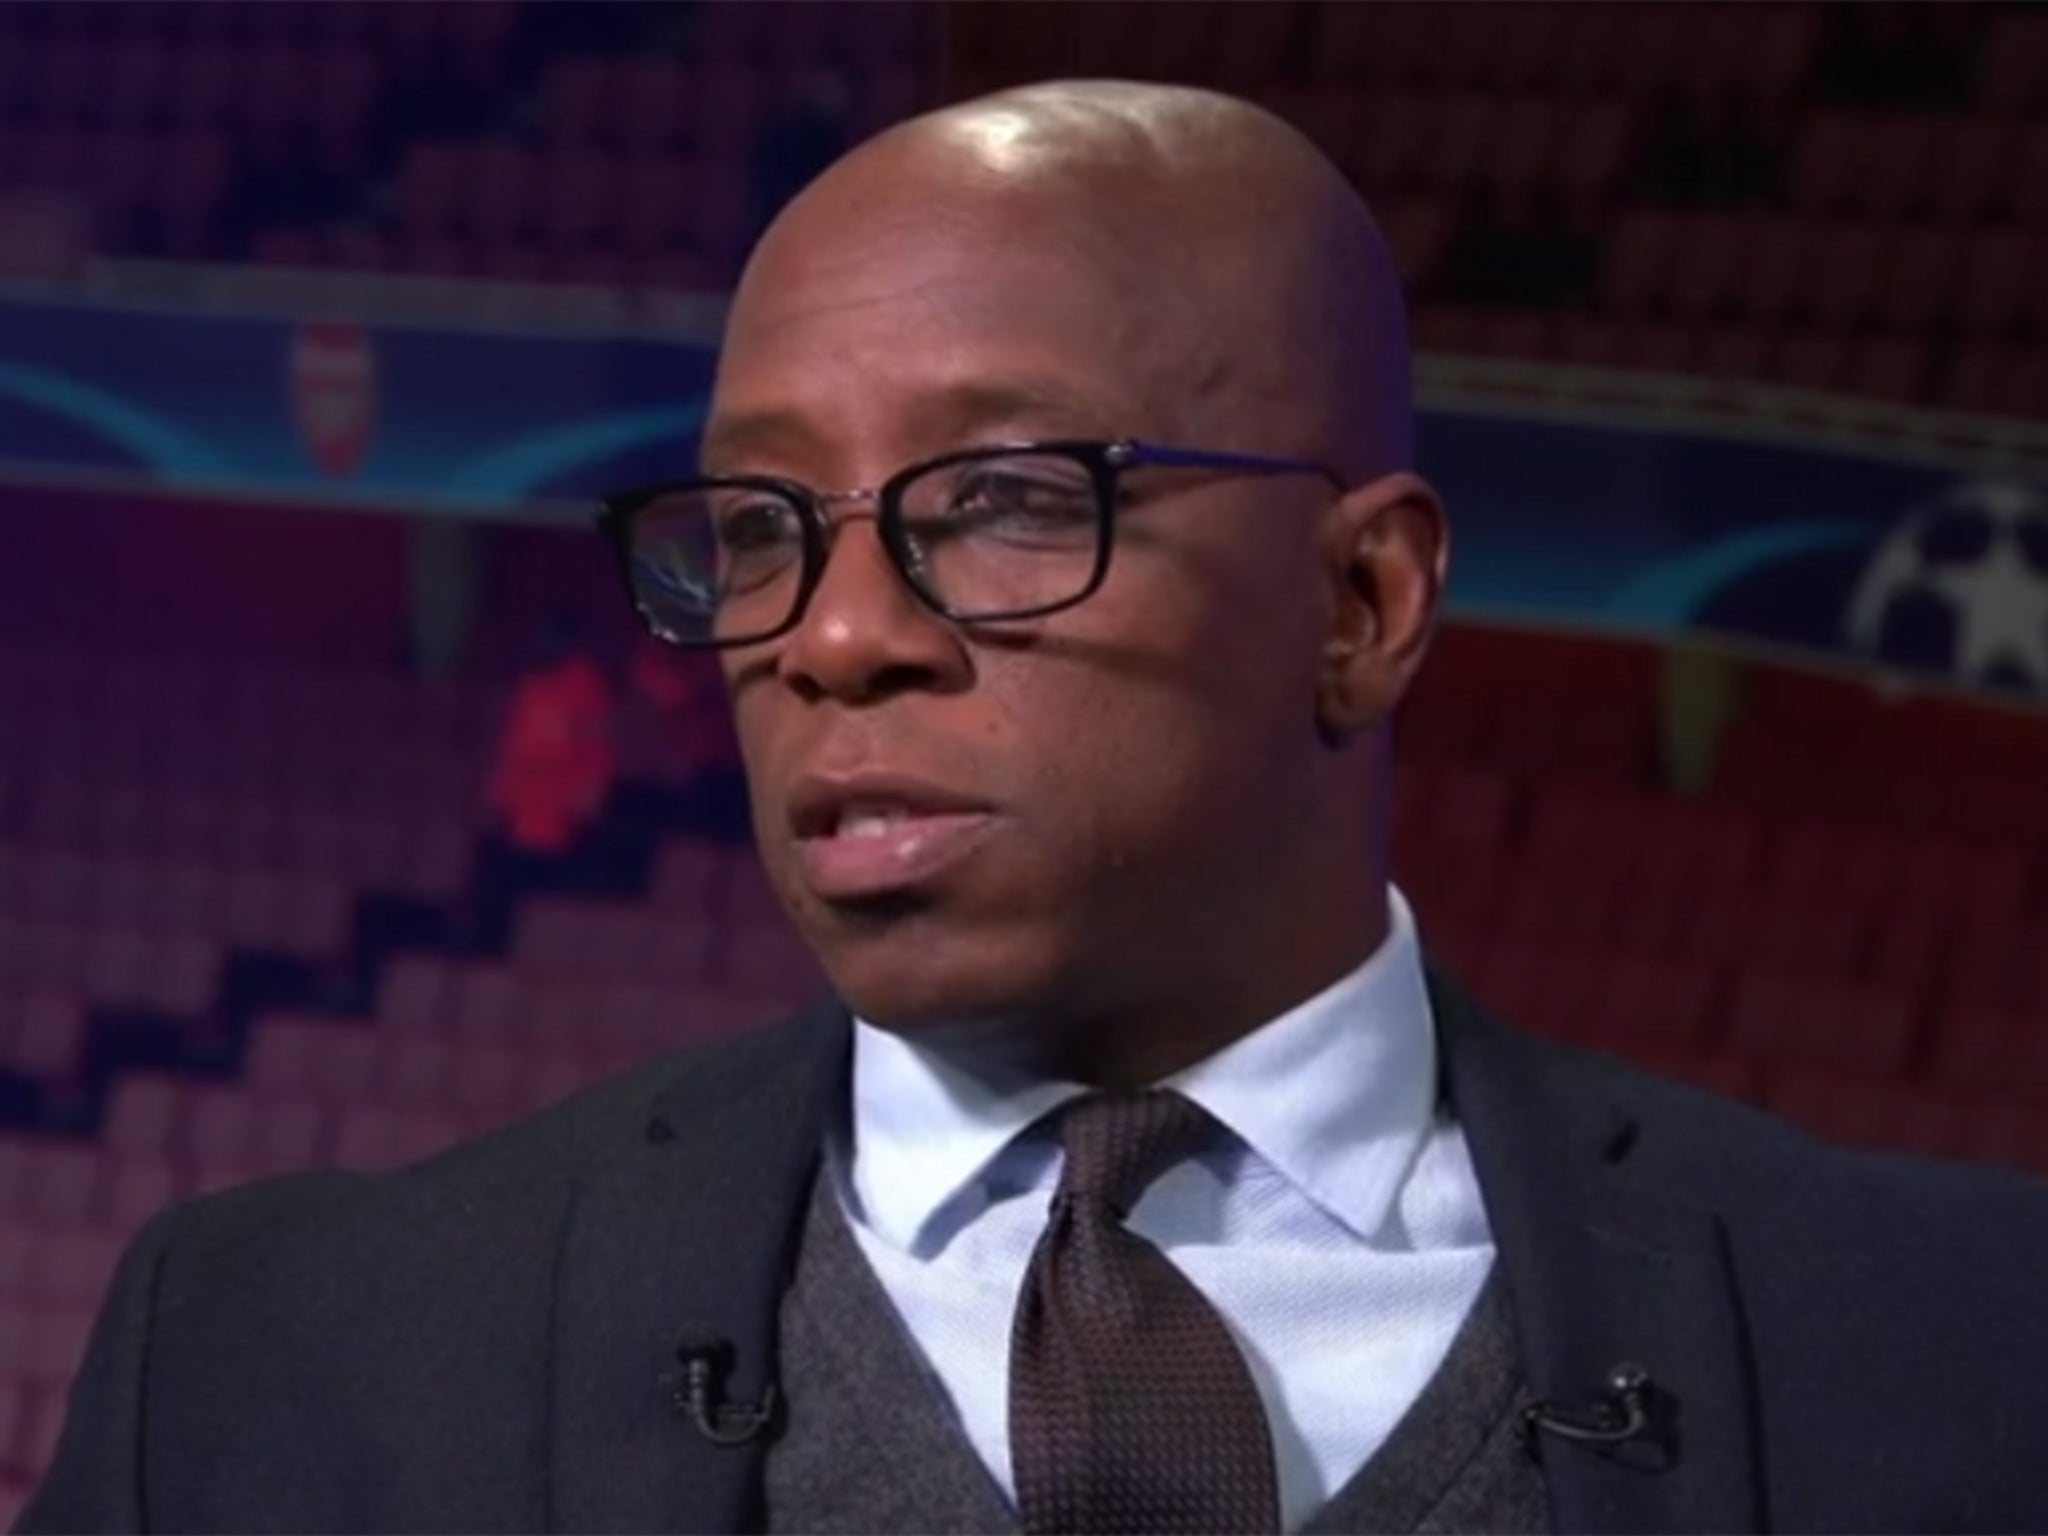 Ian Wright played under Arsene Wenger during the manager's early years at Arsenal